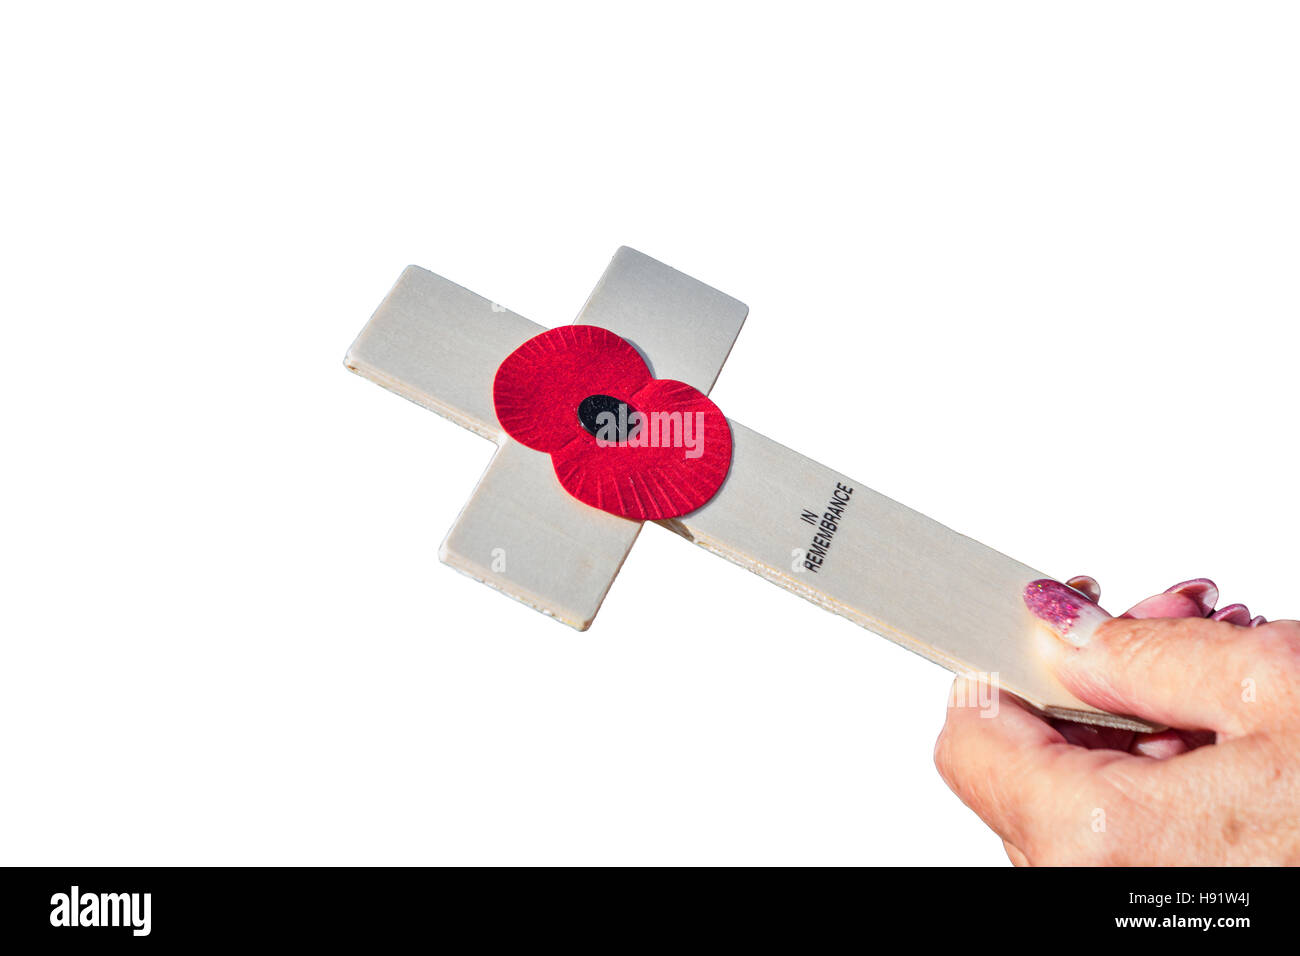 Female hand holding a wooden poppy appeal cross. Stock Photo